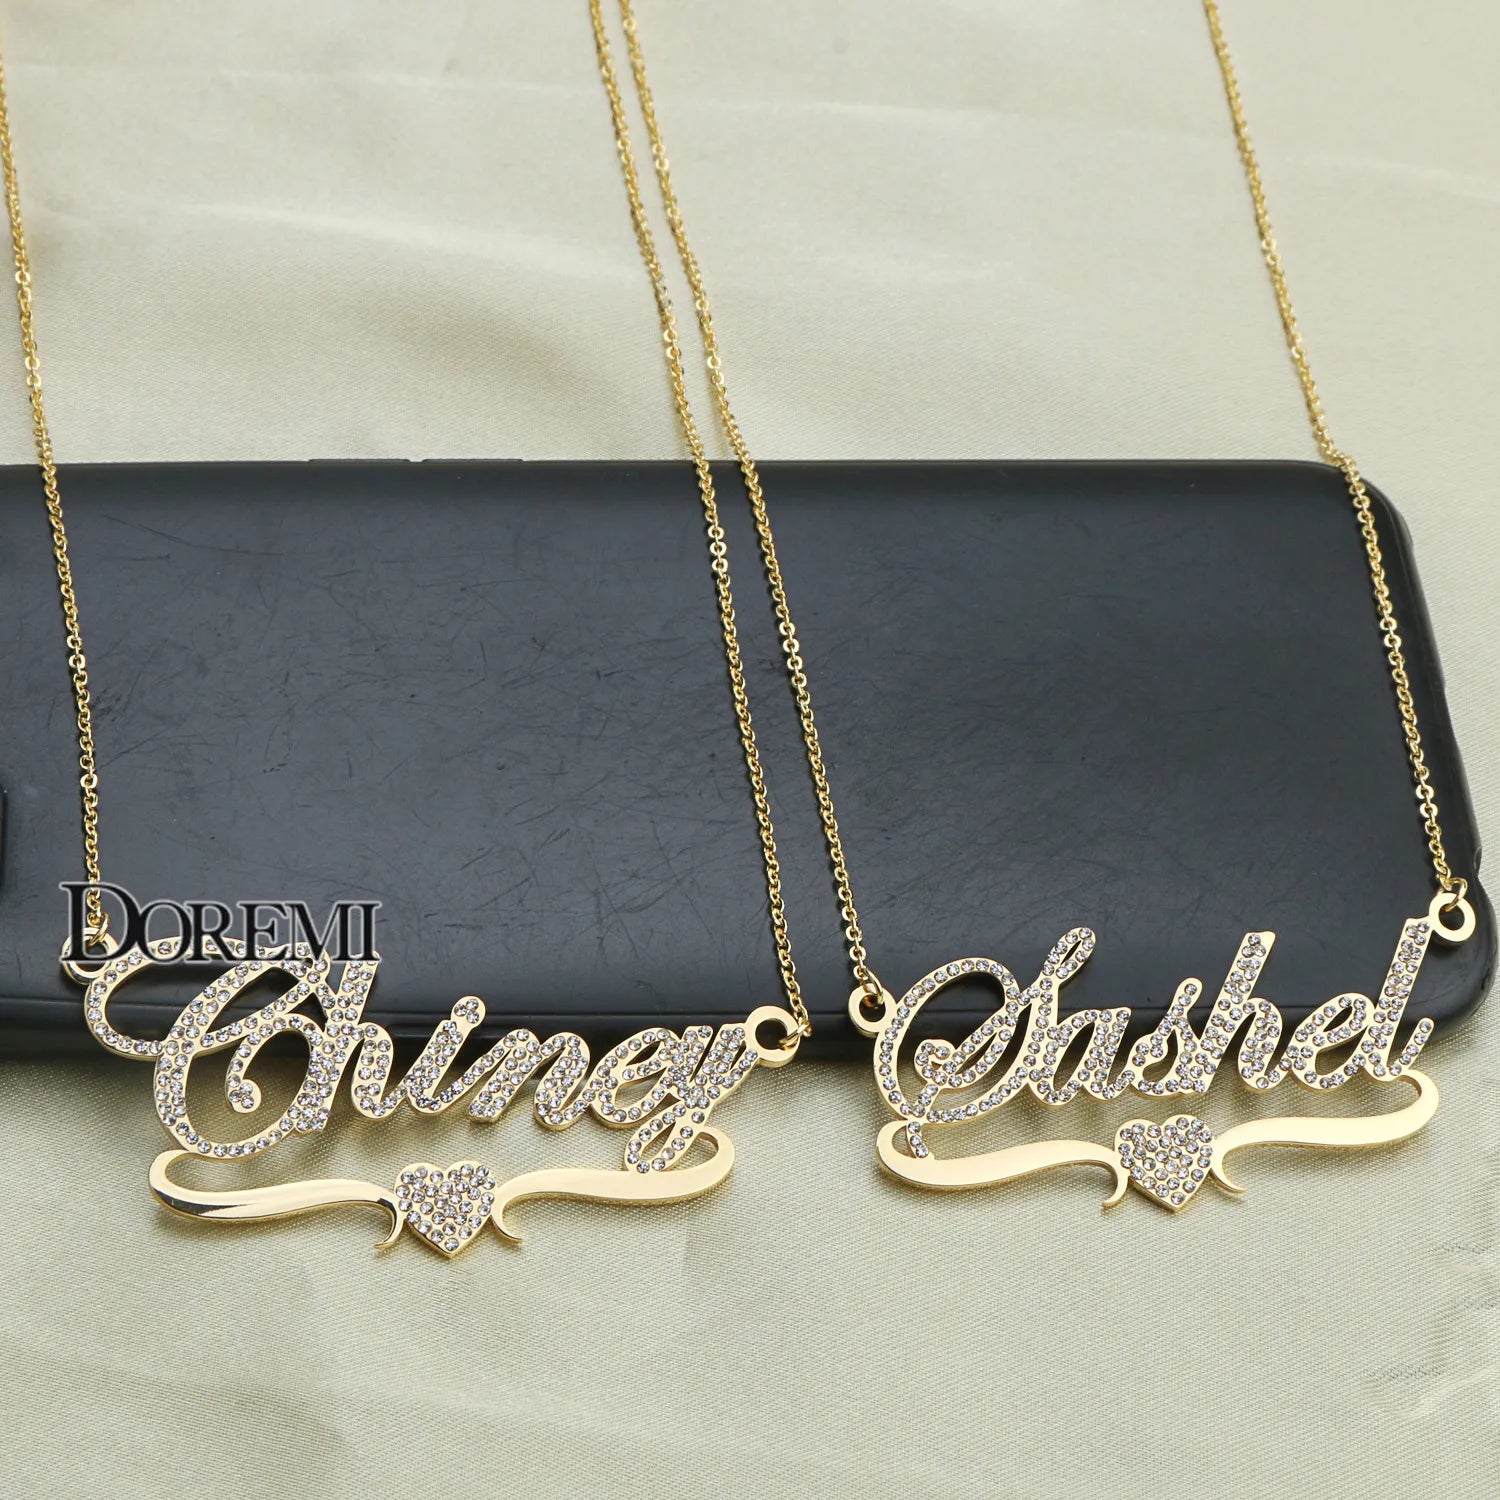 DOREMI 316L Stainless Custom Name Pendant Necklace